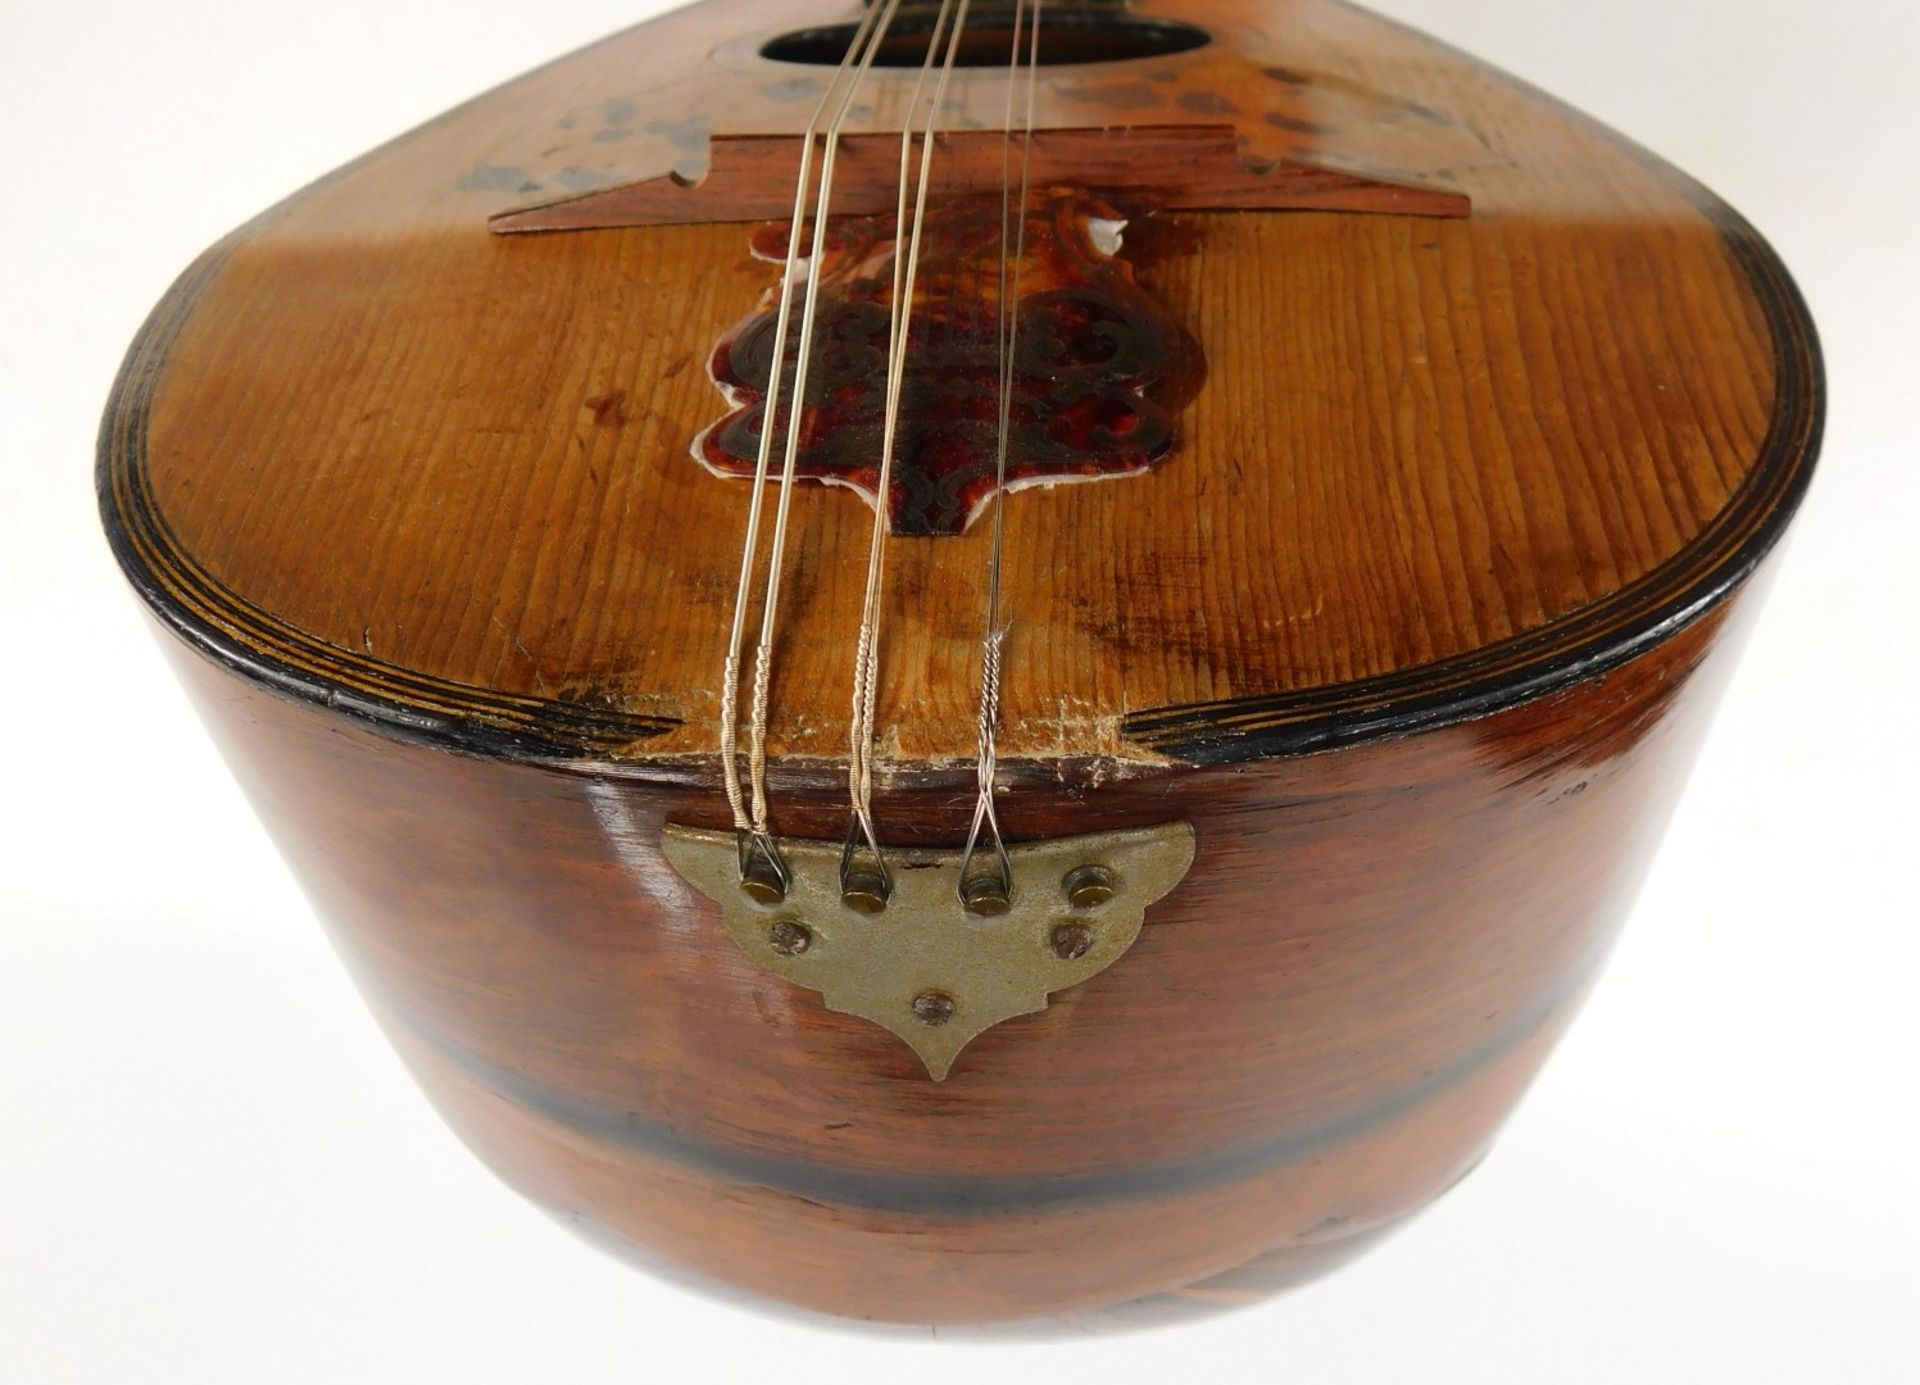 A Neopolitan mandolin, with tortoiseshell applied detail, with an ebonised stem and bone tuning pins - Image 8 of 8